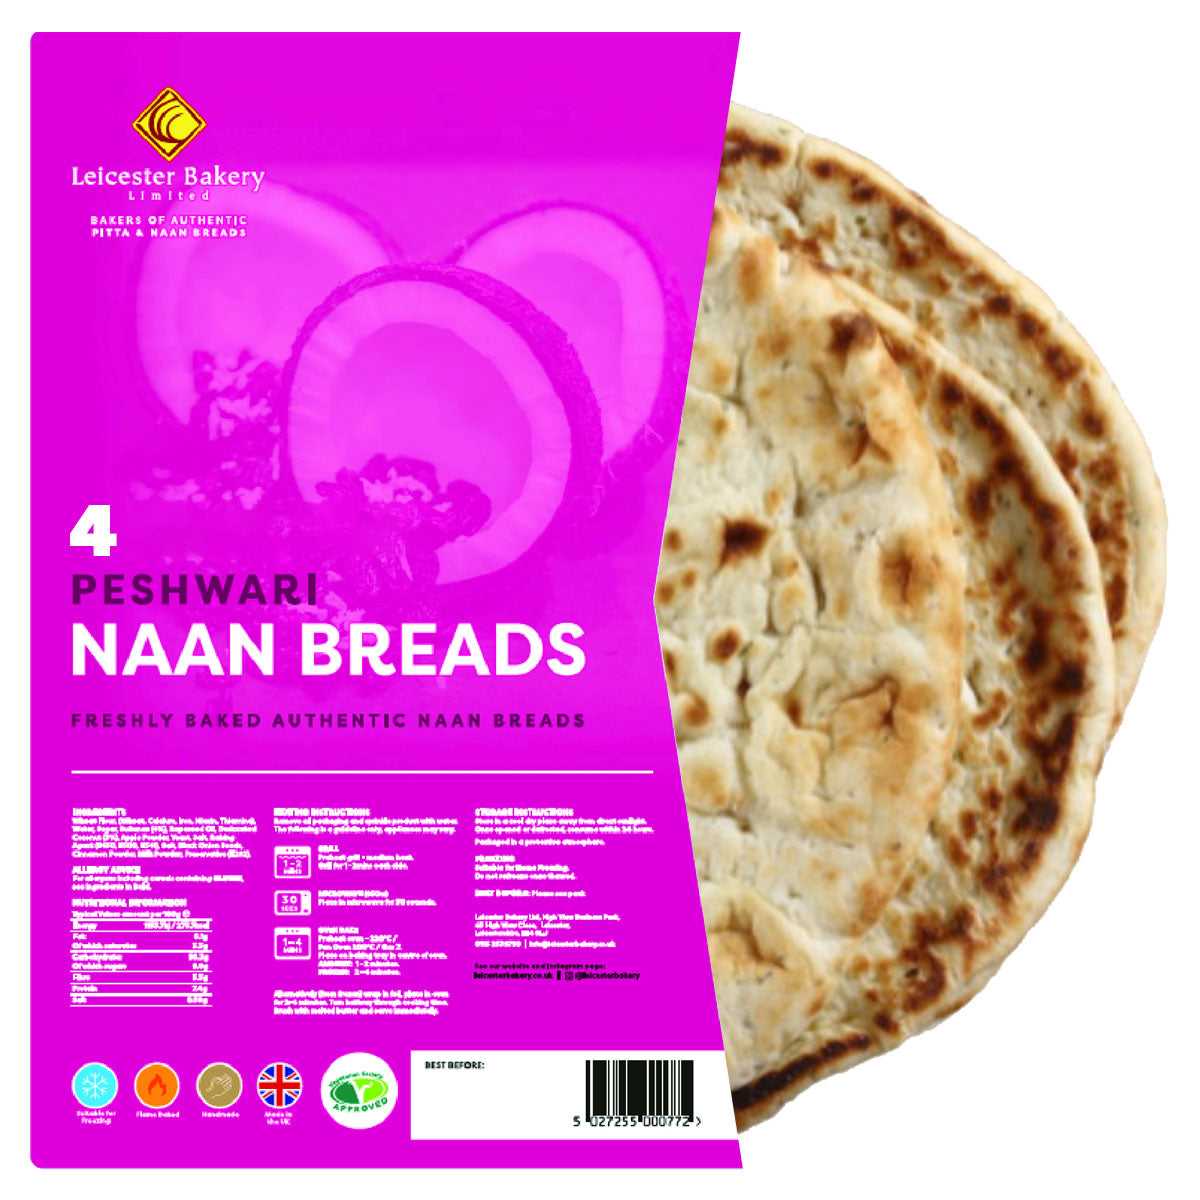 A package of Leicester Bakery - Peshwari Naan Bread - 4 Pack.